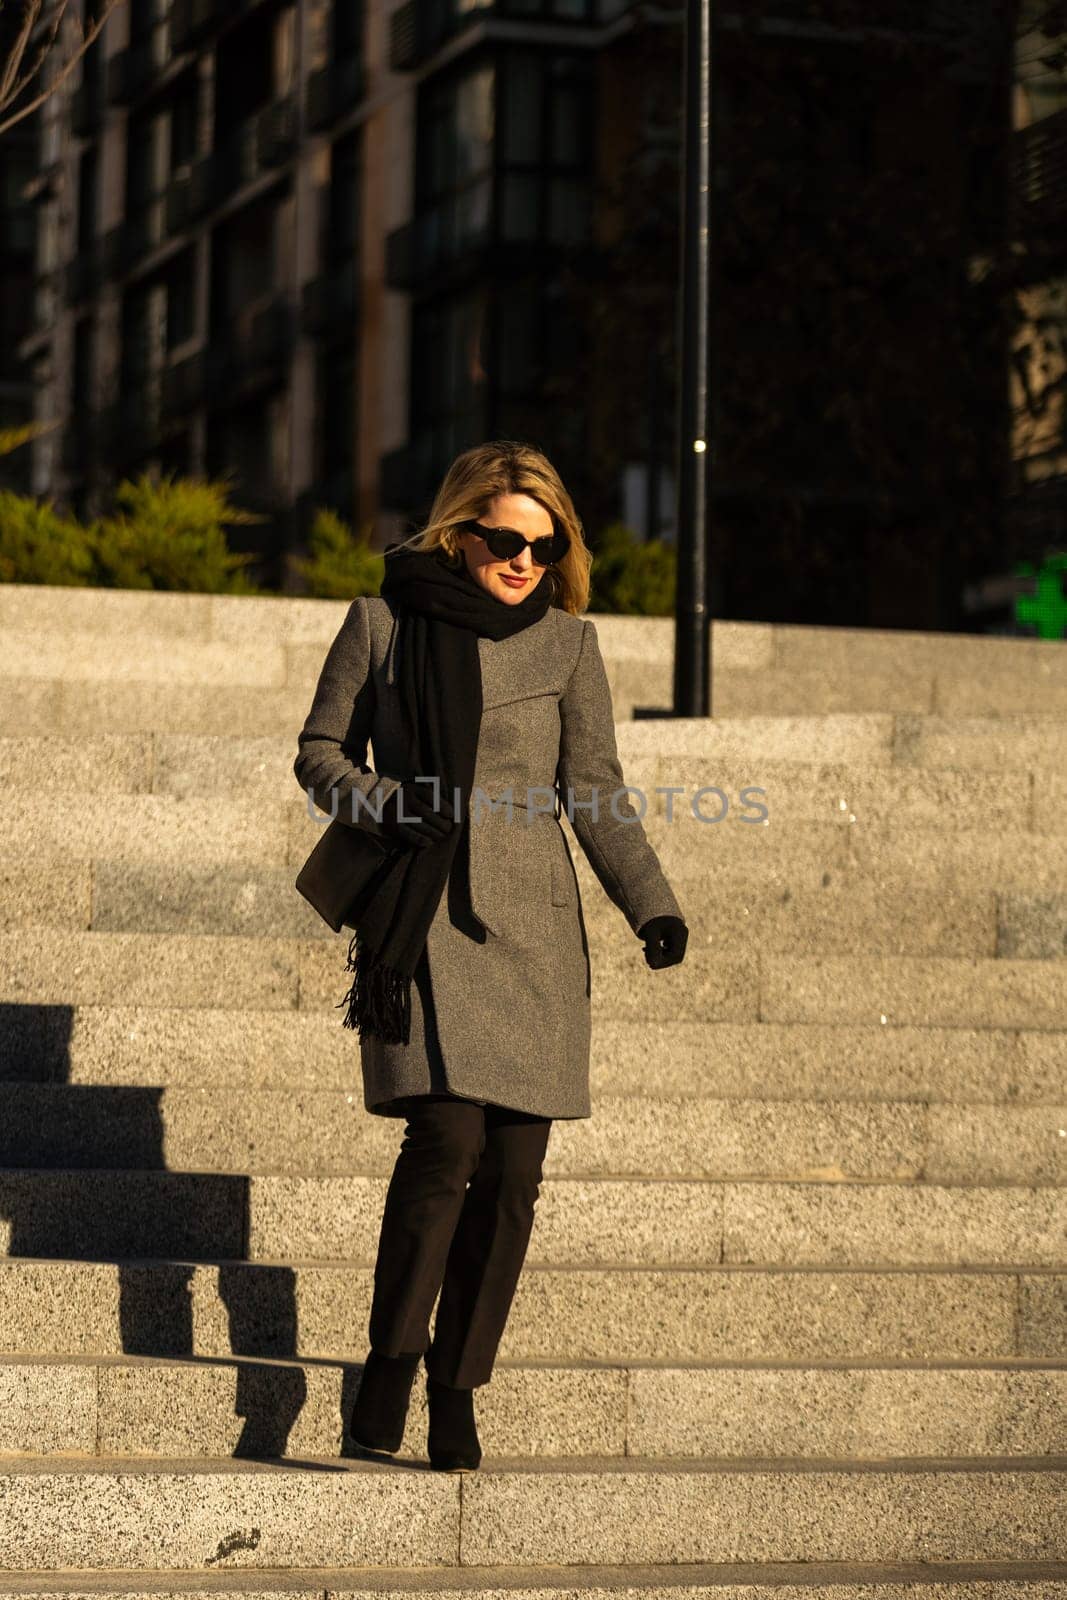 The young lady in black stylish coat with black scarf walking the sun rays at sunset on the background the cold autumn day in the city by Andelov13